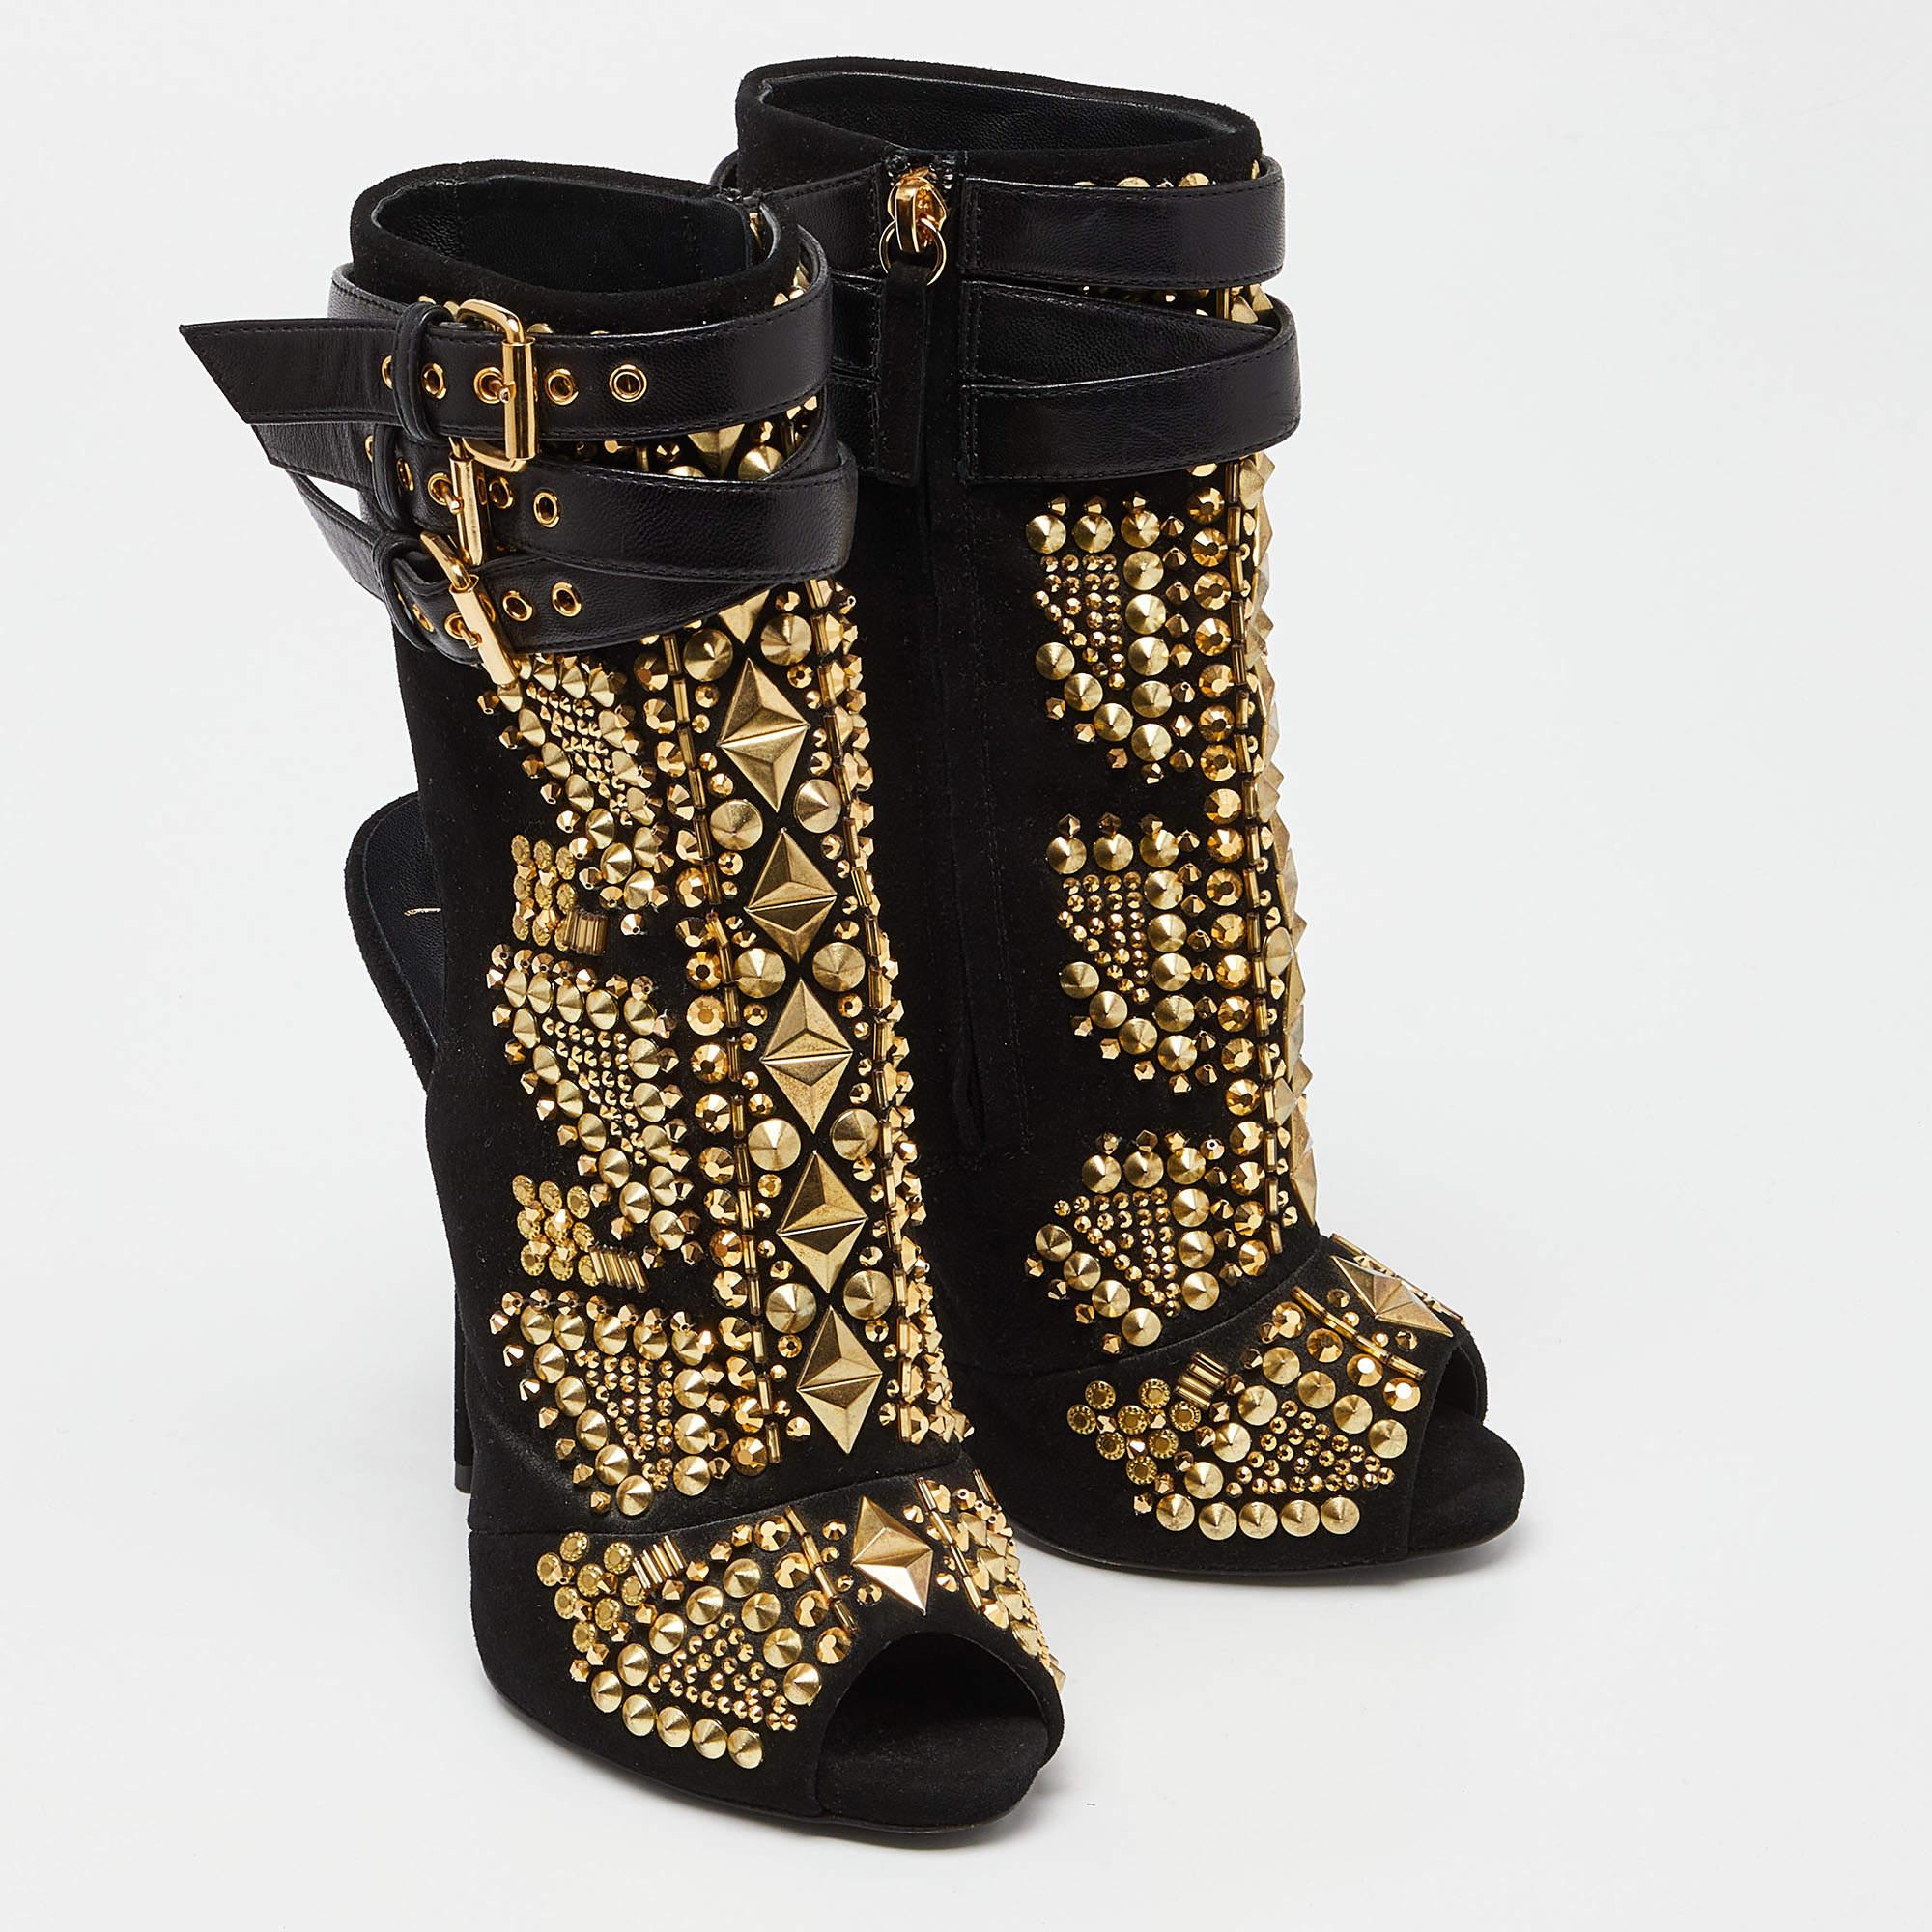 Giuseppe Zanotti Black Suede and Leather Studded Cutout Peep Toe Ankle Boots Siz For Sale 1